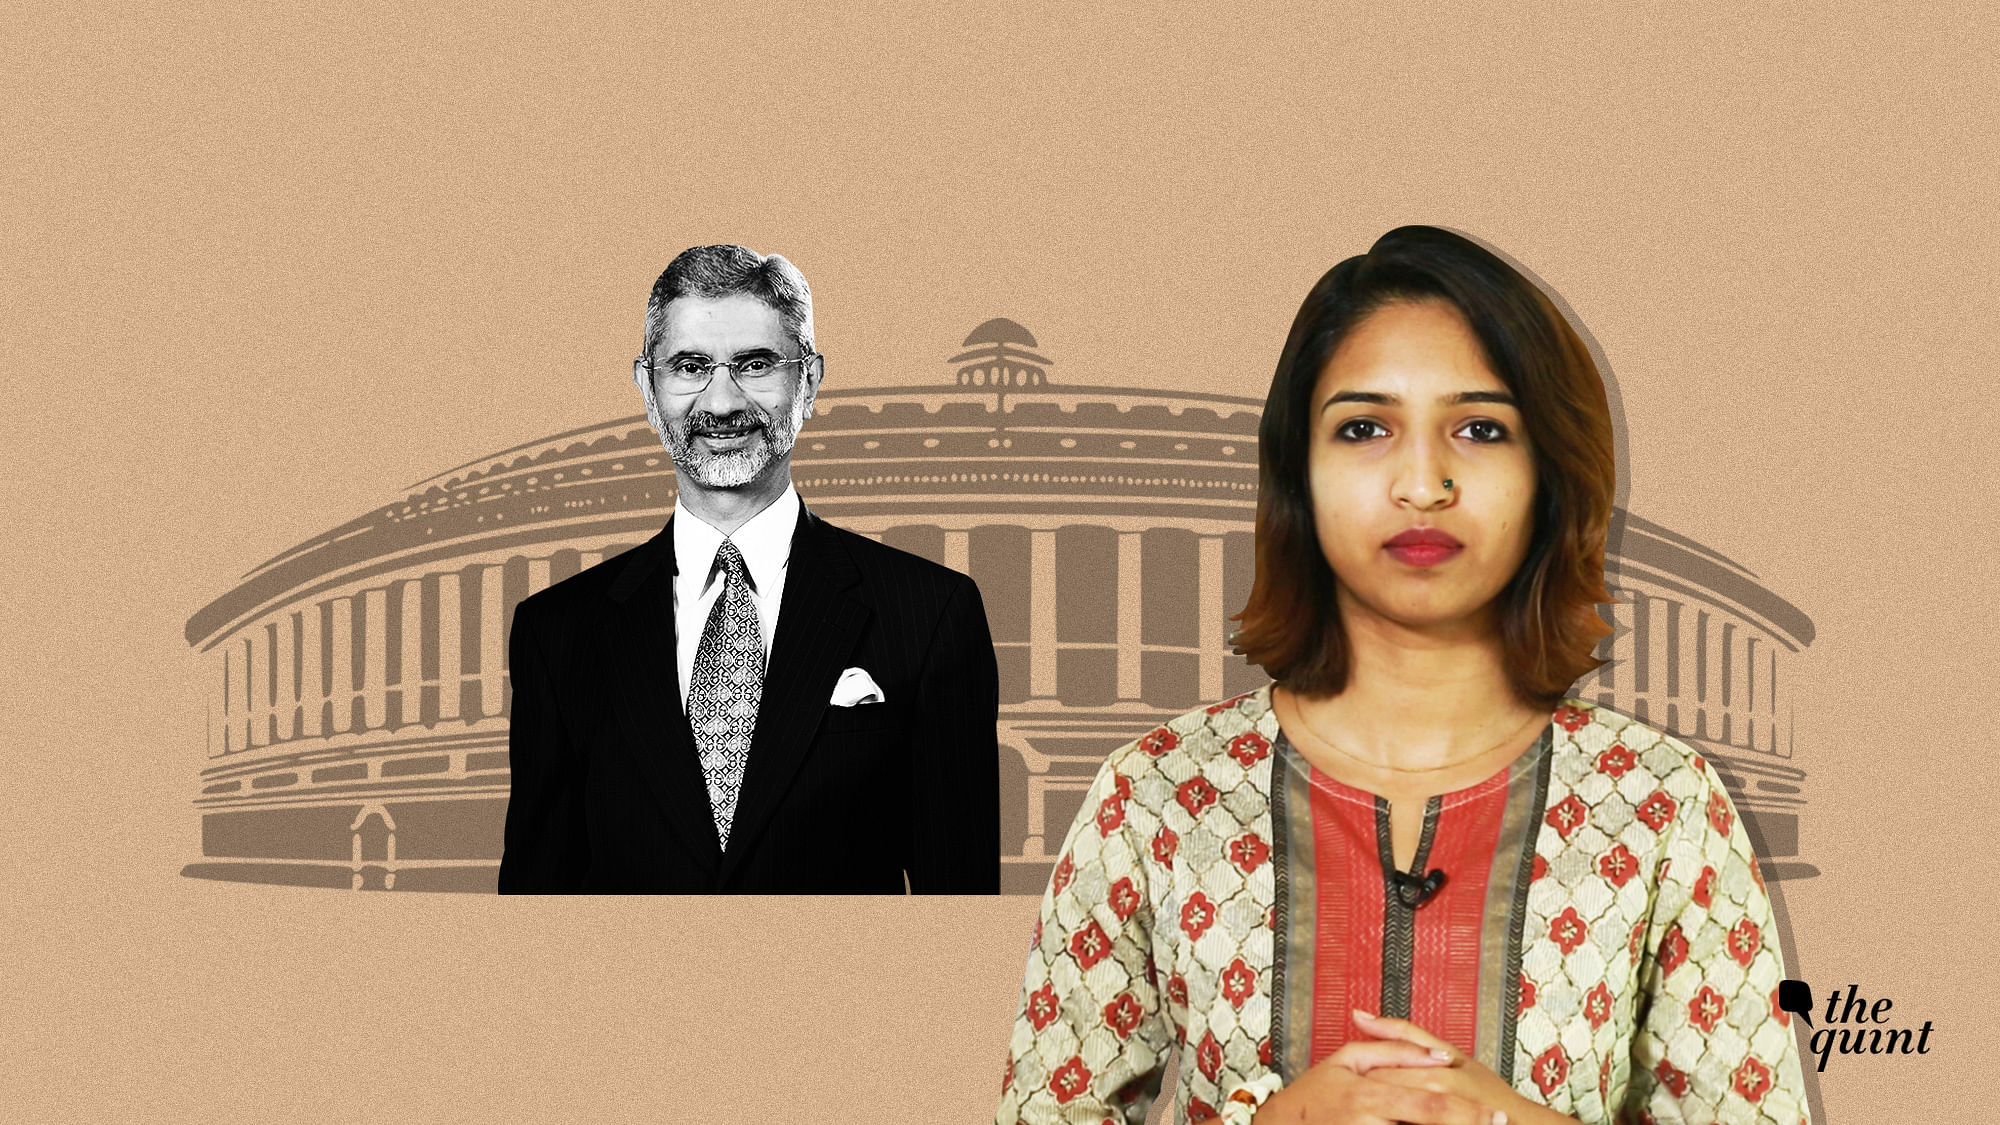 Modi Cabinet Misters 2019: Why is S Jaishankar being universally hailed as a great pick for External Affairs Minister?